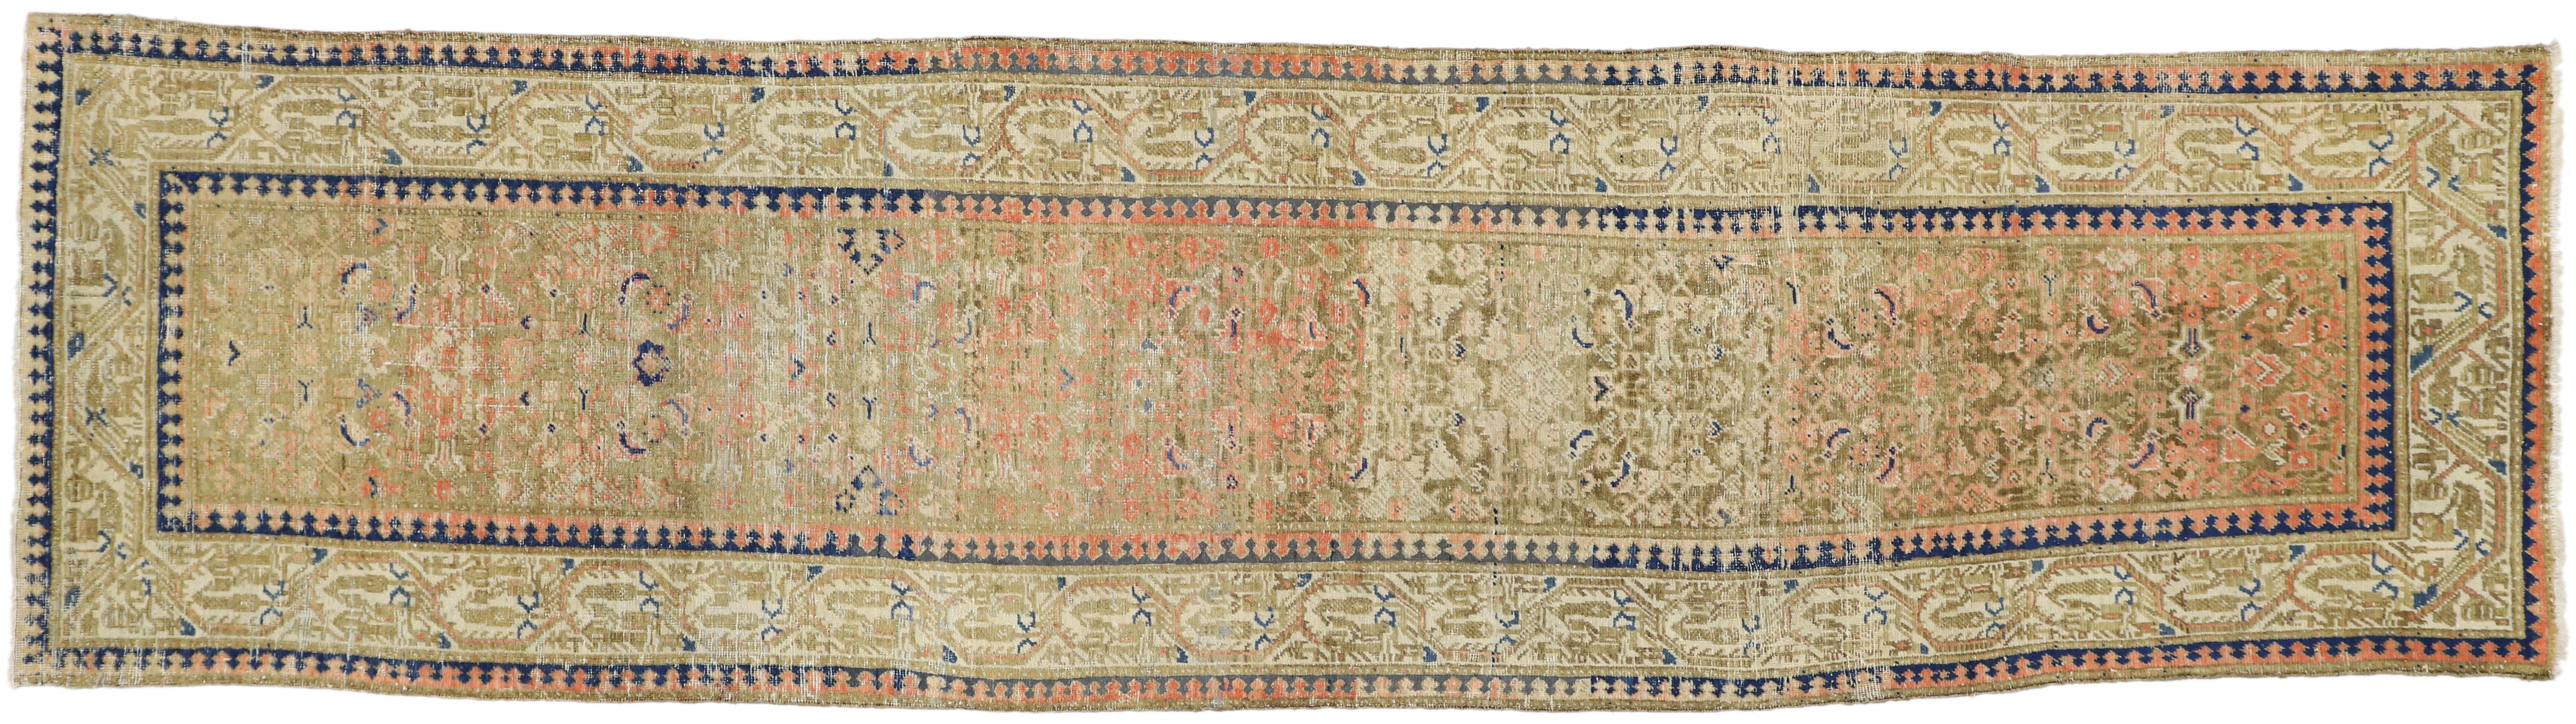 Distressed Vintage Turkish Sivas Runner with Rustic Pacific Northwest Style For Sale 3